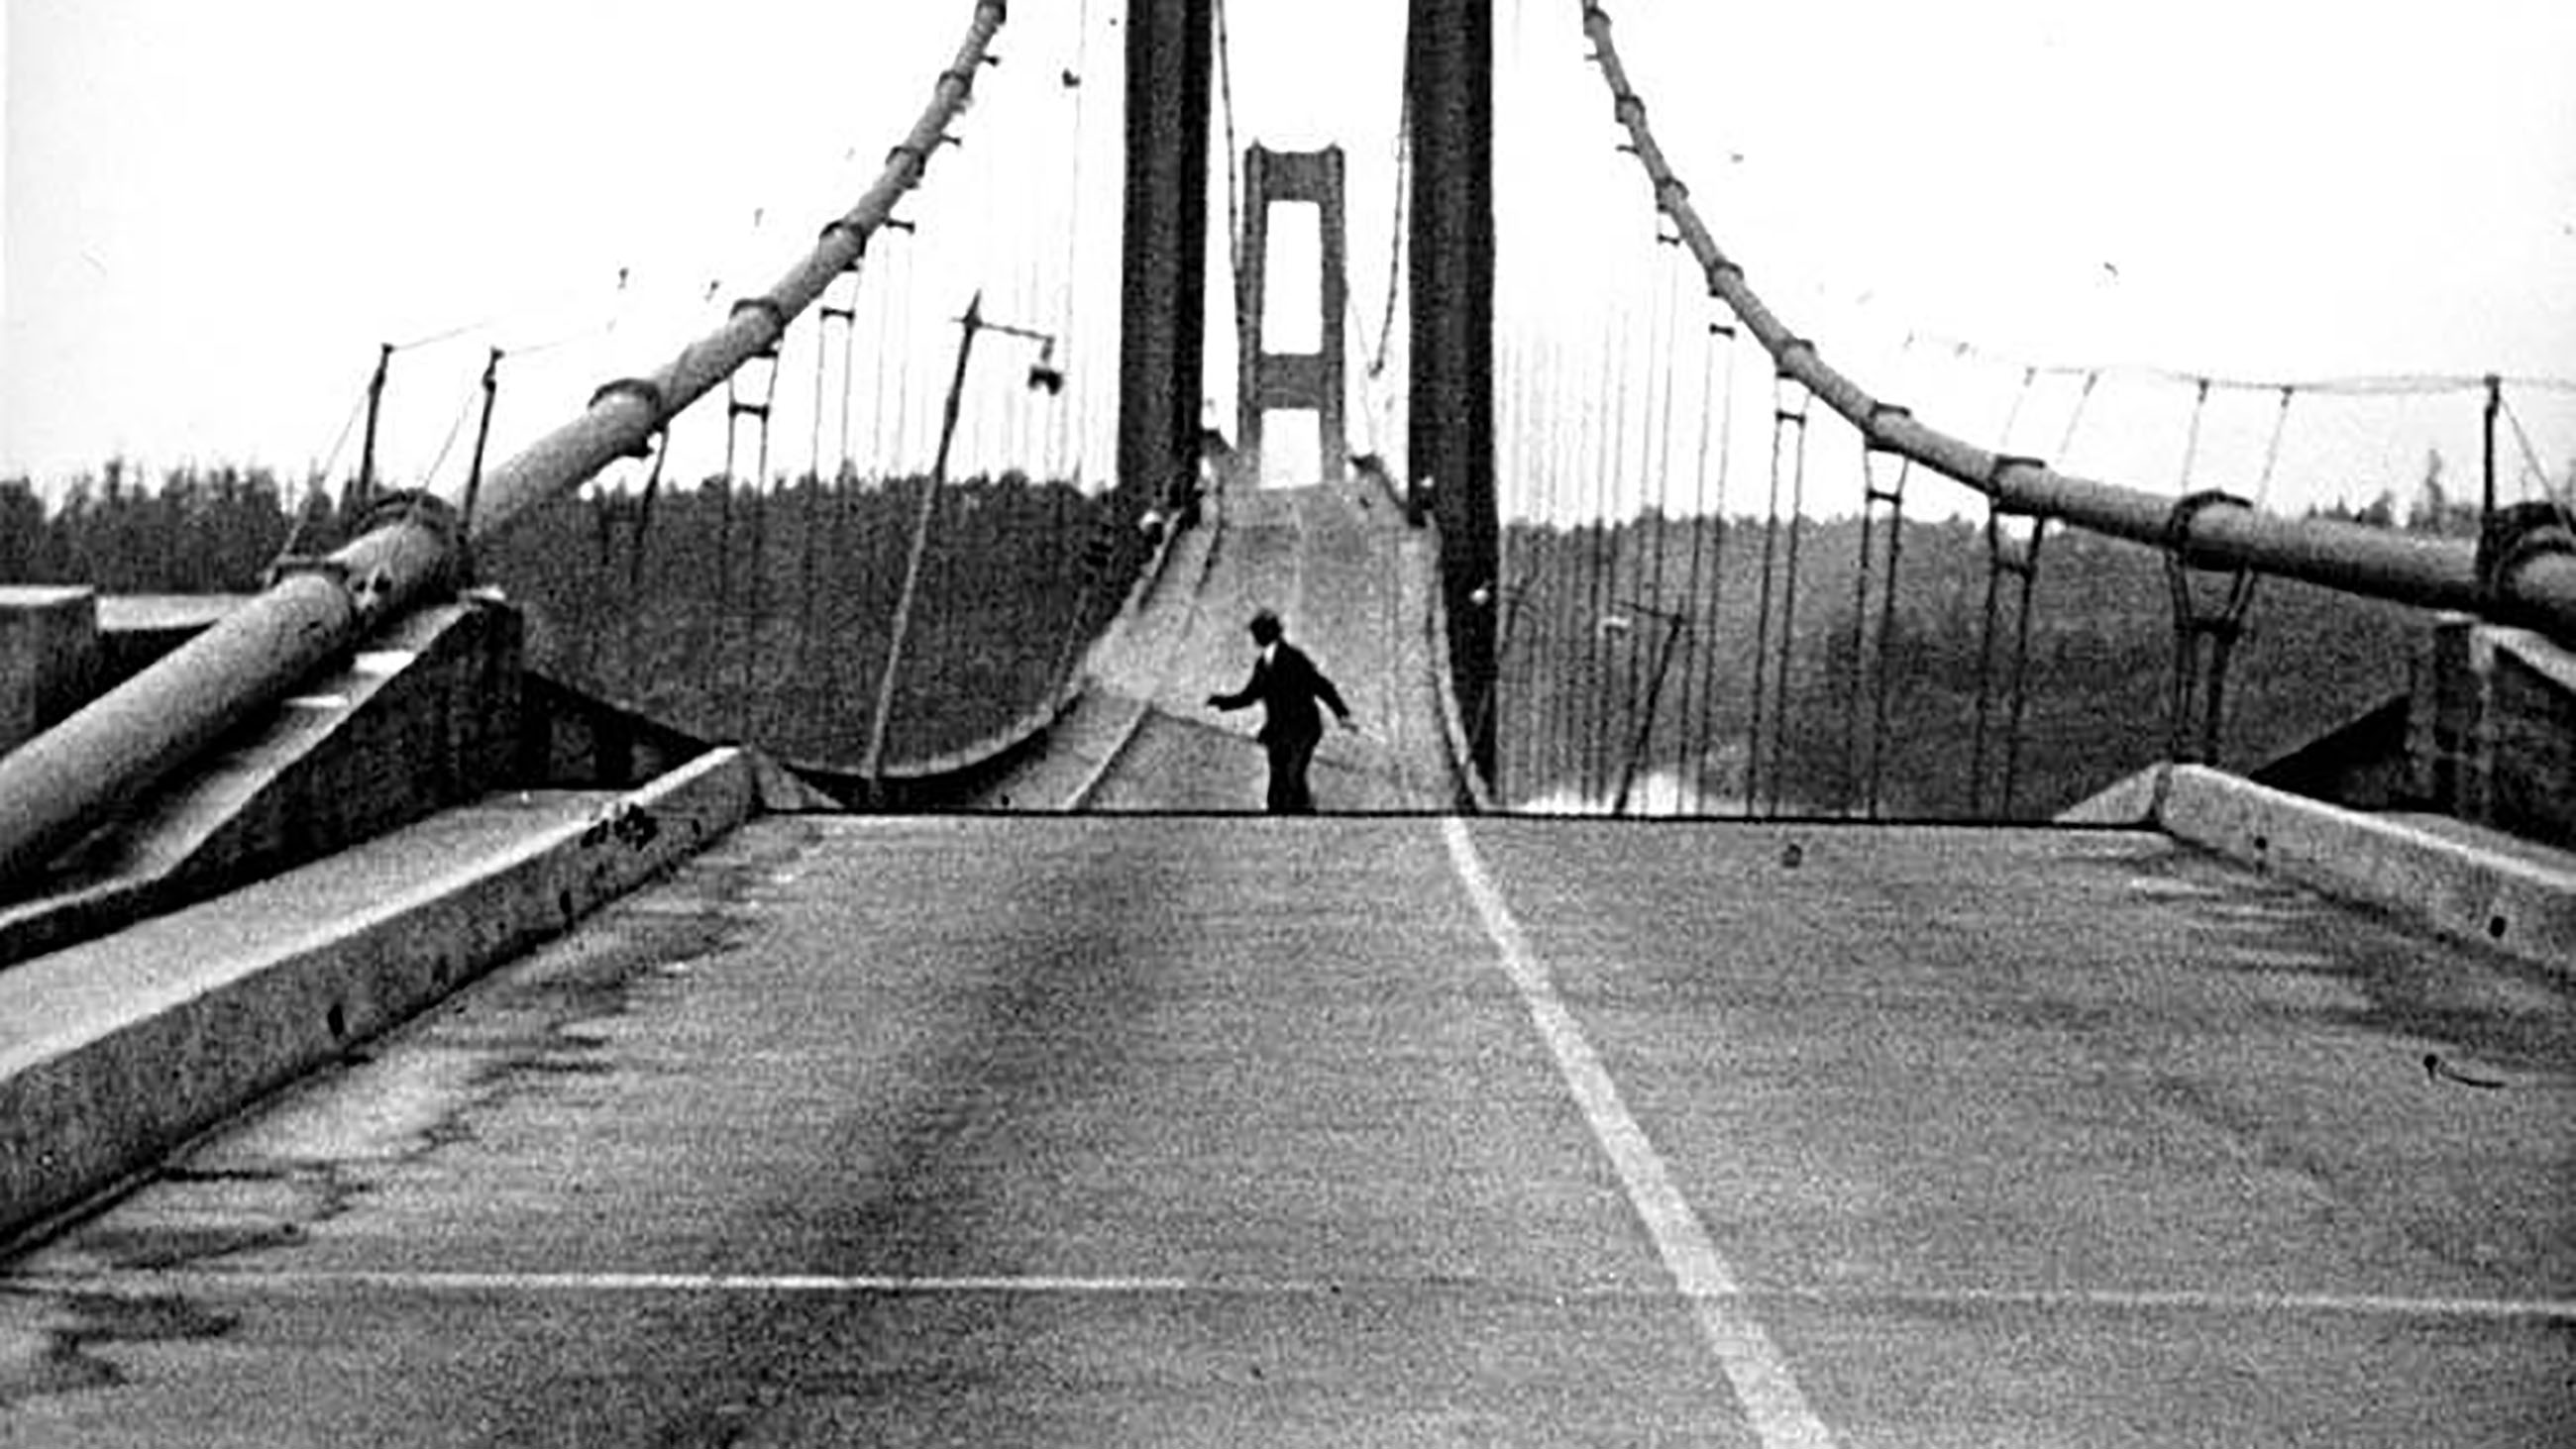 The Tacoma Narrows bridge in Washington undulated violently and eventually collapsed on Nov. 7, 1940, amid high winds. The incident has become a cautionary tale in engineering.